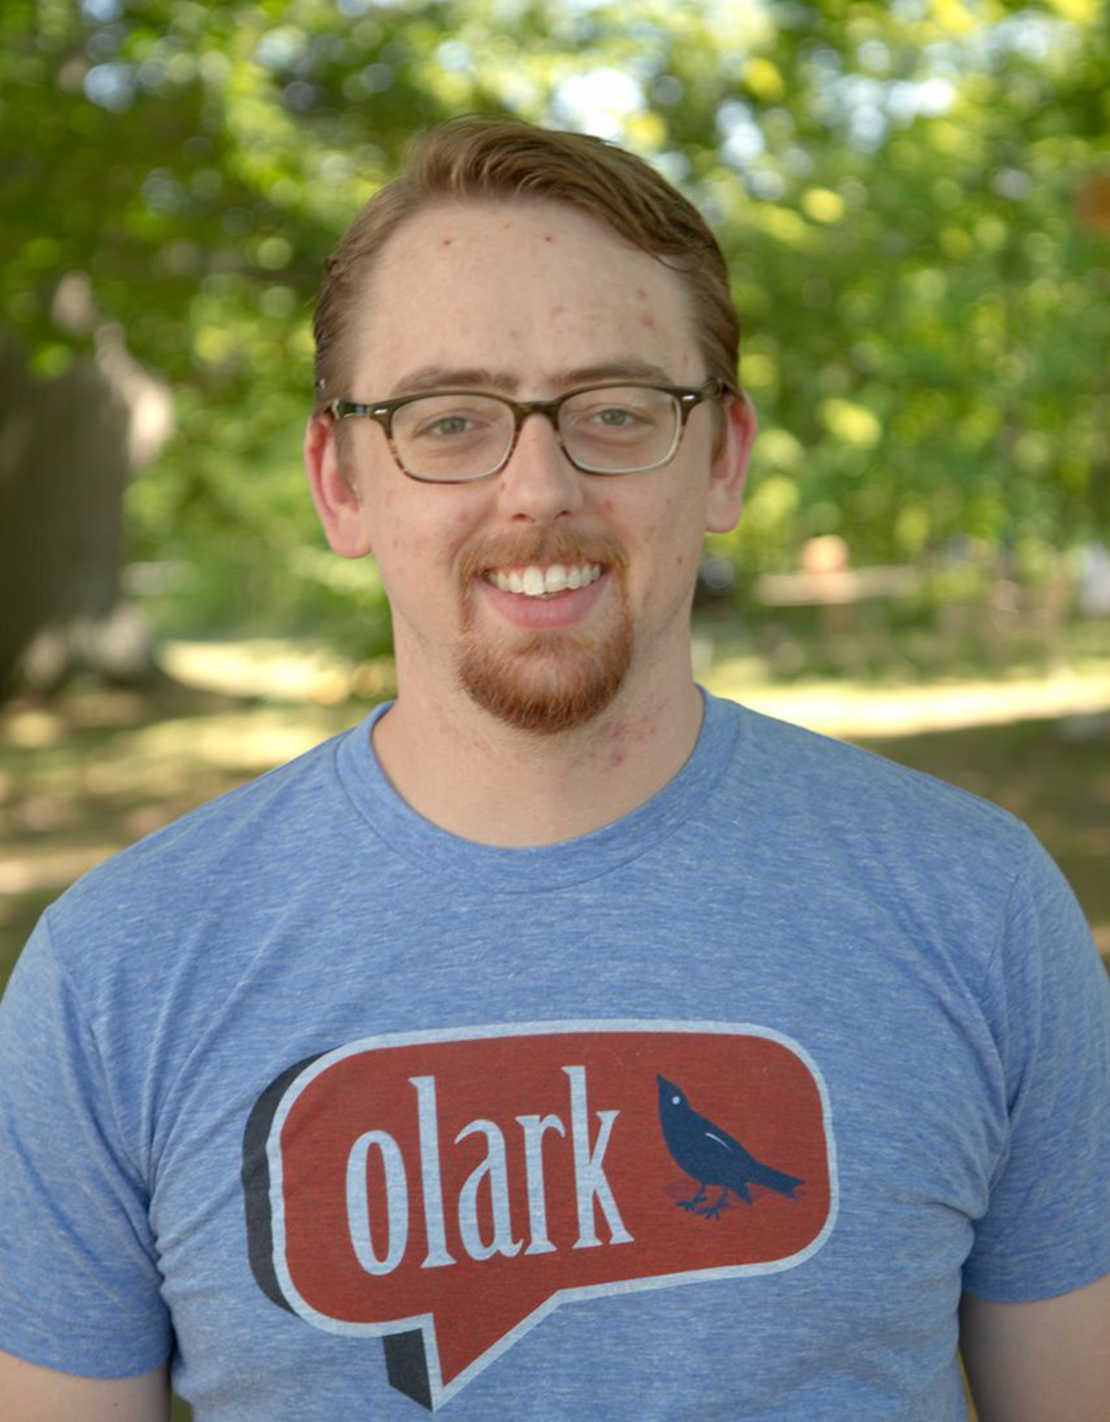 Airport codes co-creator Nick Crohn is a software engineer for Olark.